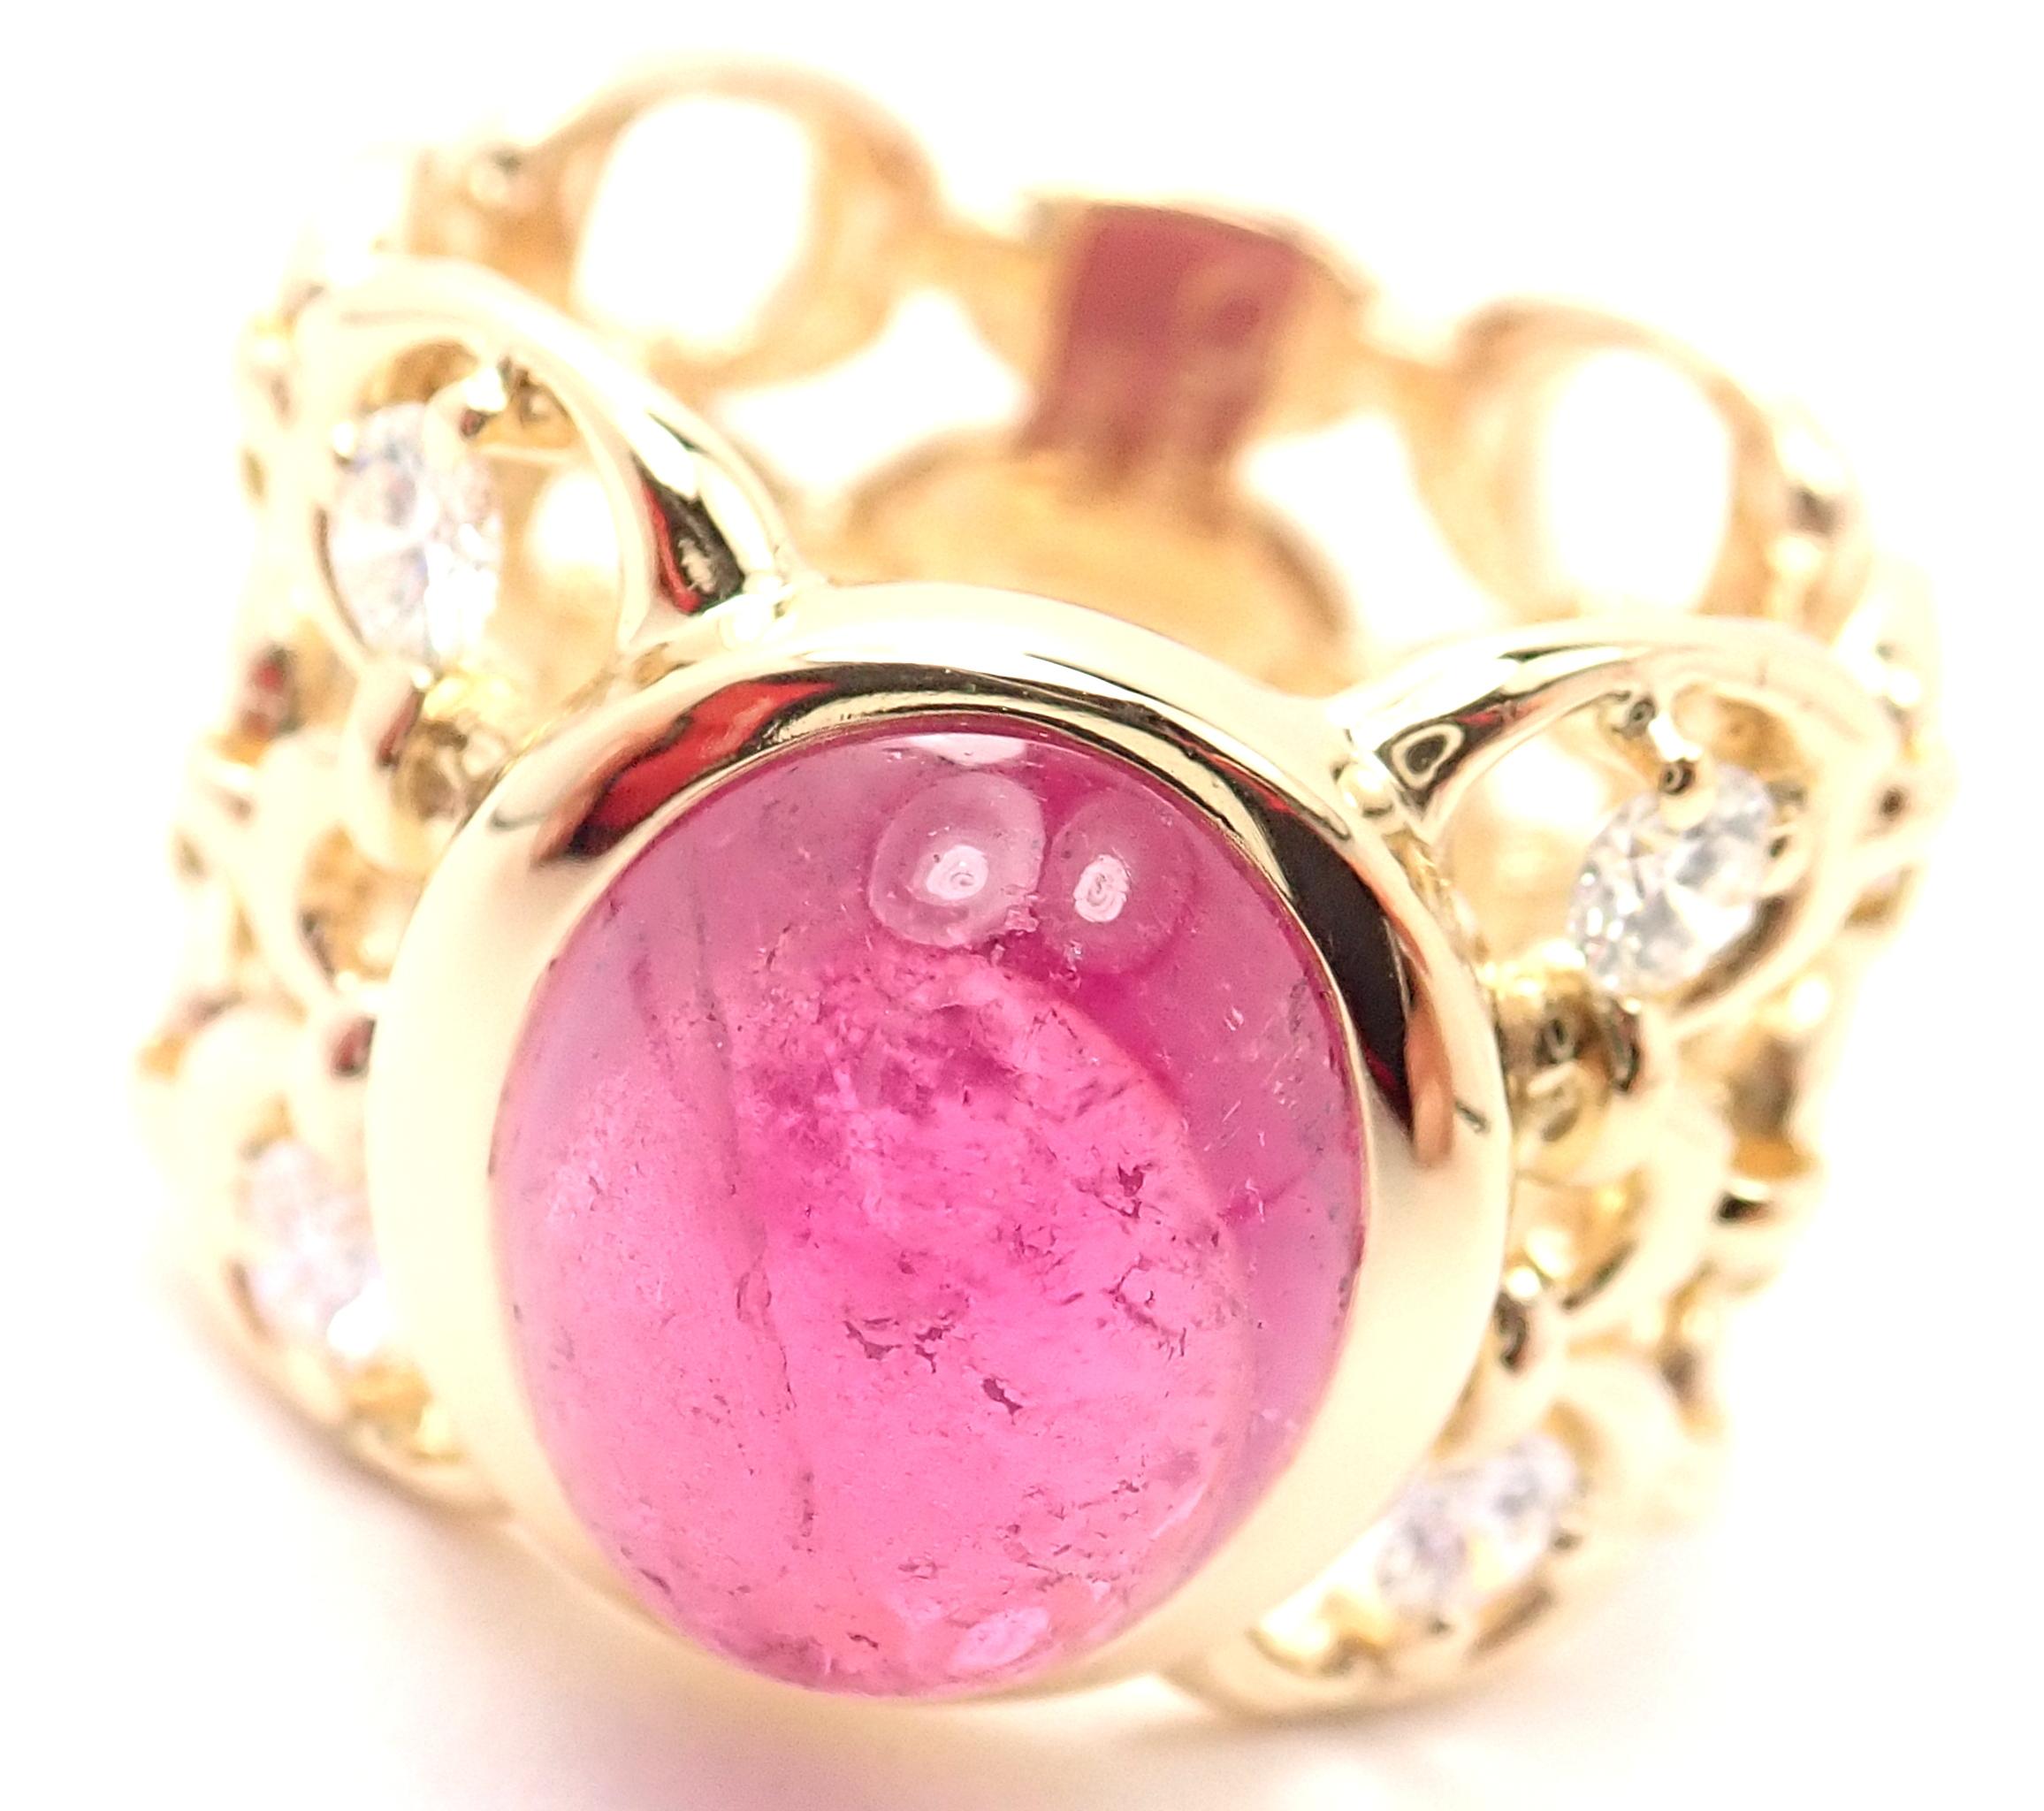 18k Yellow Gold Diamond Large Pink Tourmaline Ring by Christian Dior. 
With 4 round brilliant cut diamonds VVS1 clarity, E color total weight approx. .30ct
1 large oval pink tourmaline 12mm x 10mm
Details: 
Size: European 59, US 8 3/4
Width: